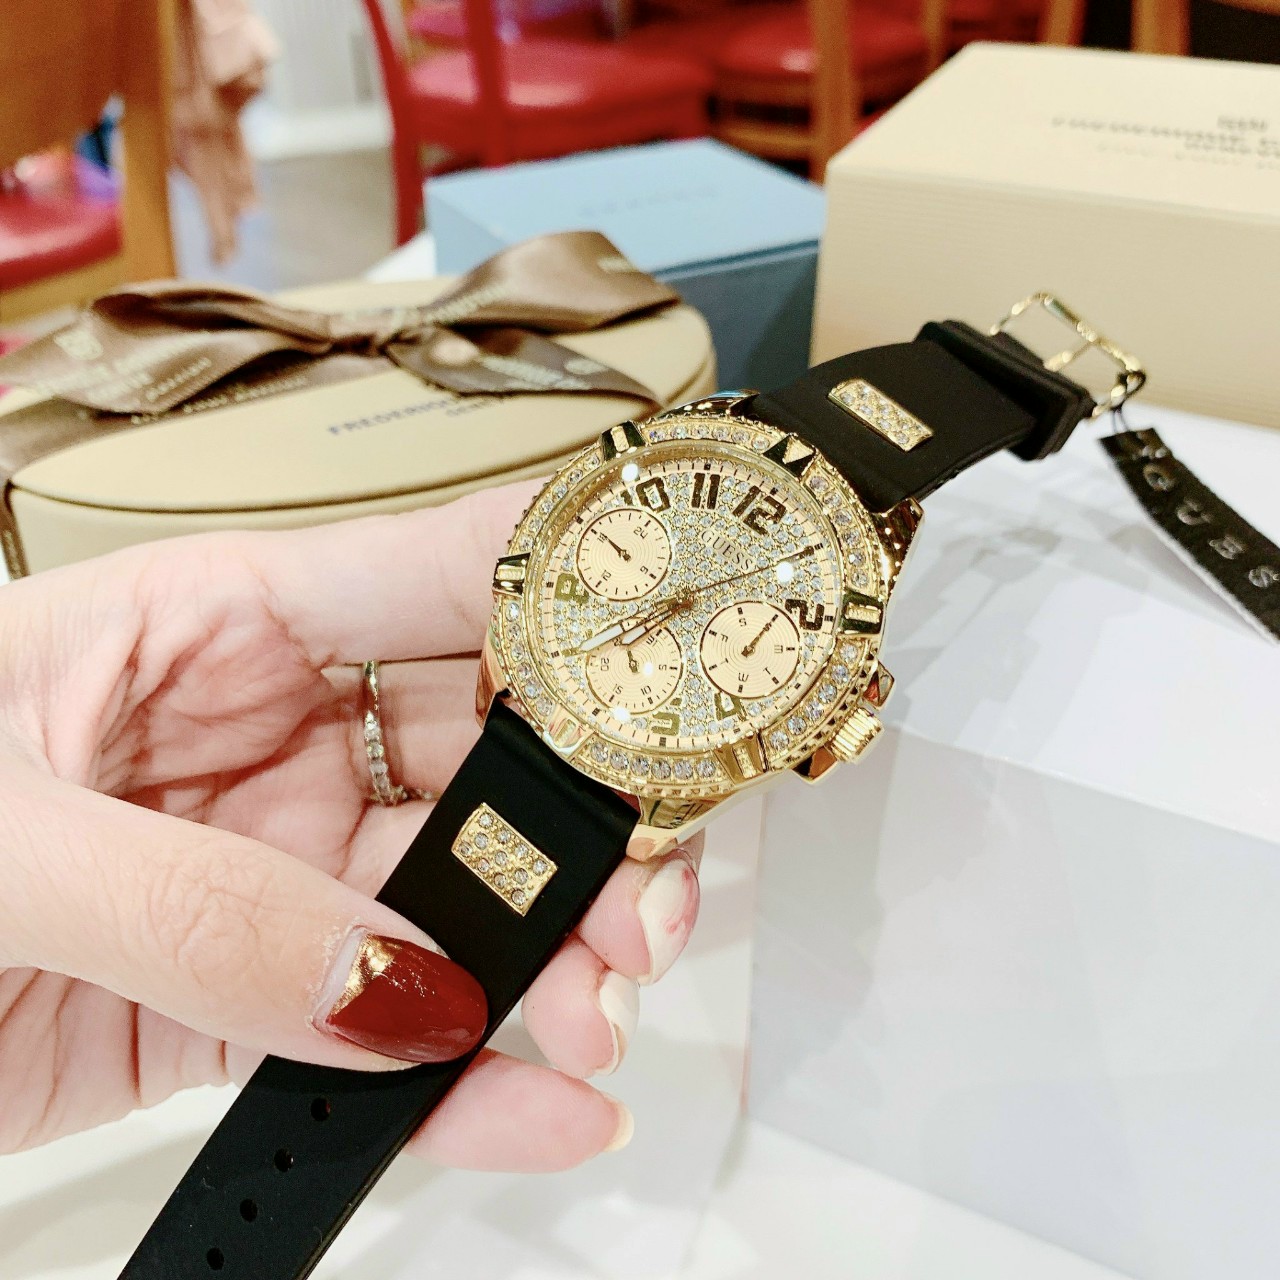 ĐỒNG HỒ GUESS DÂY SILICON UNISEX 5